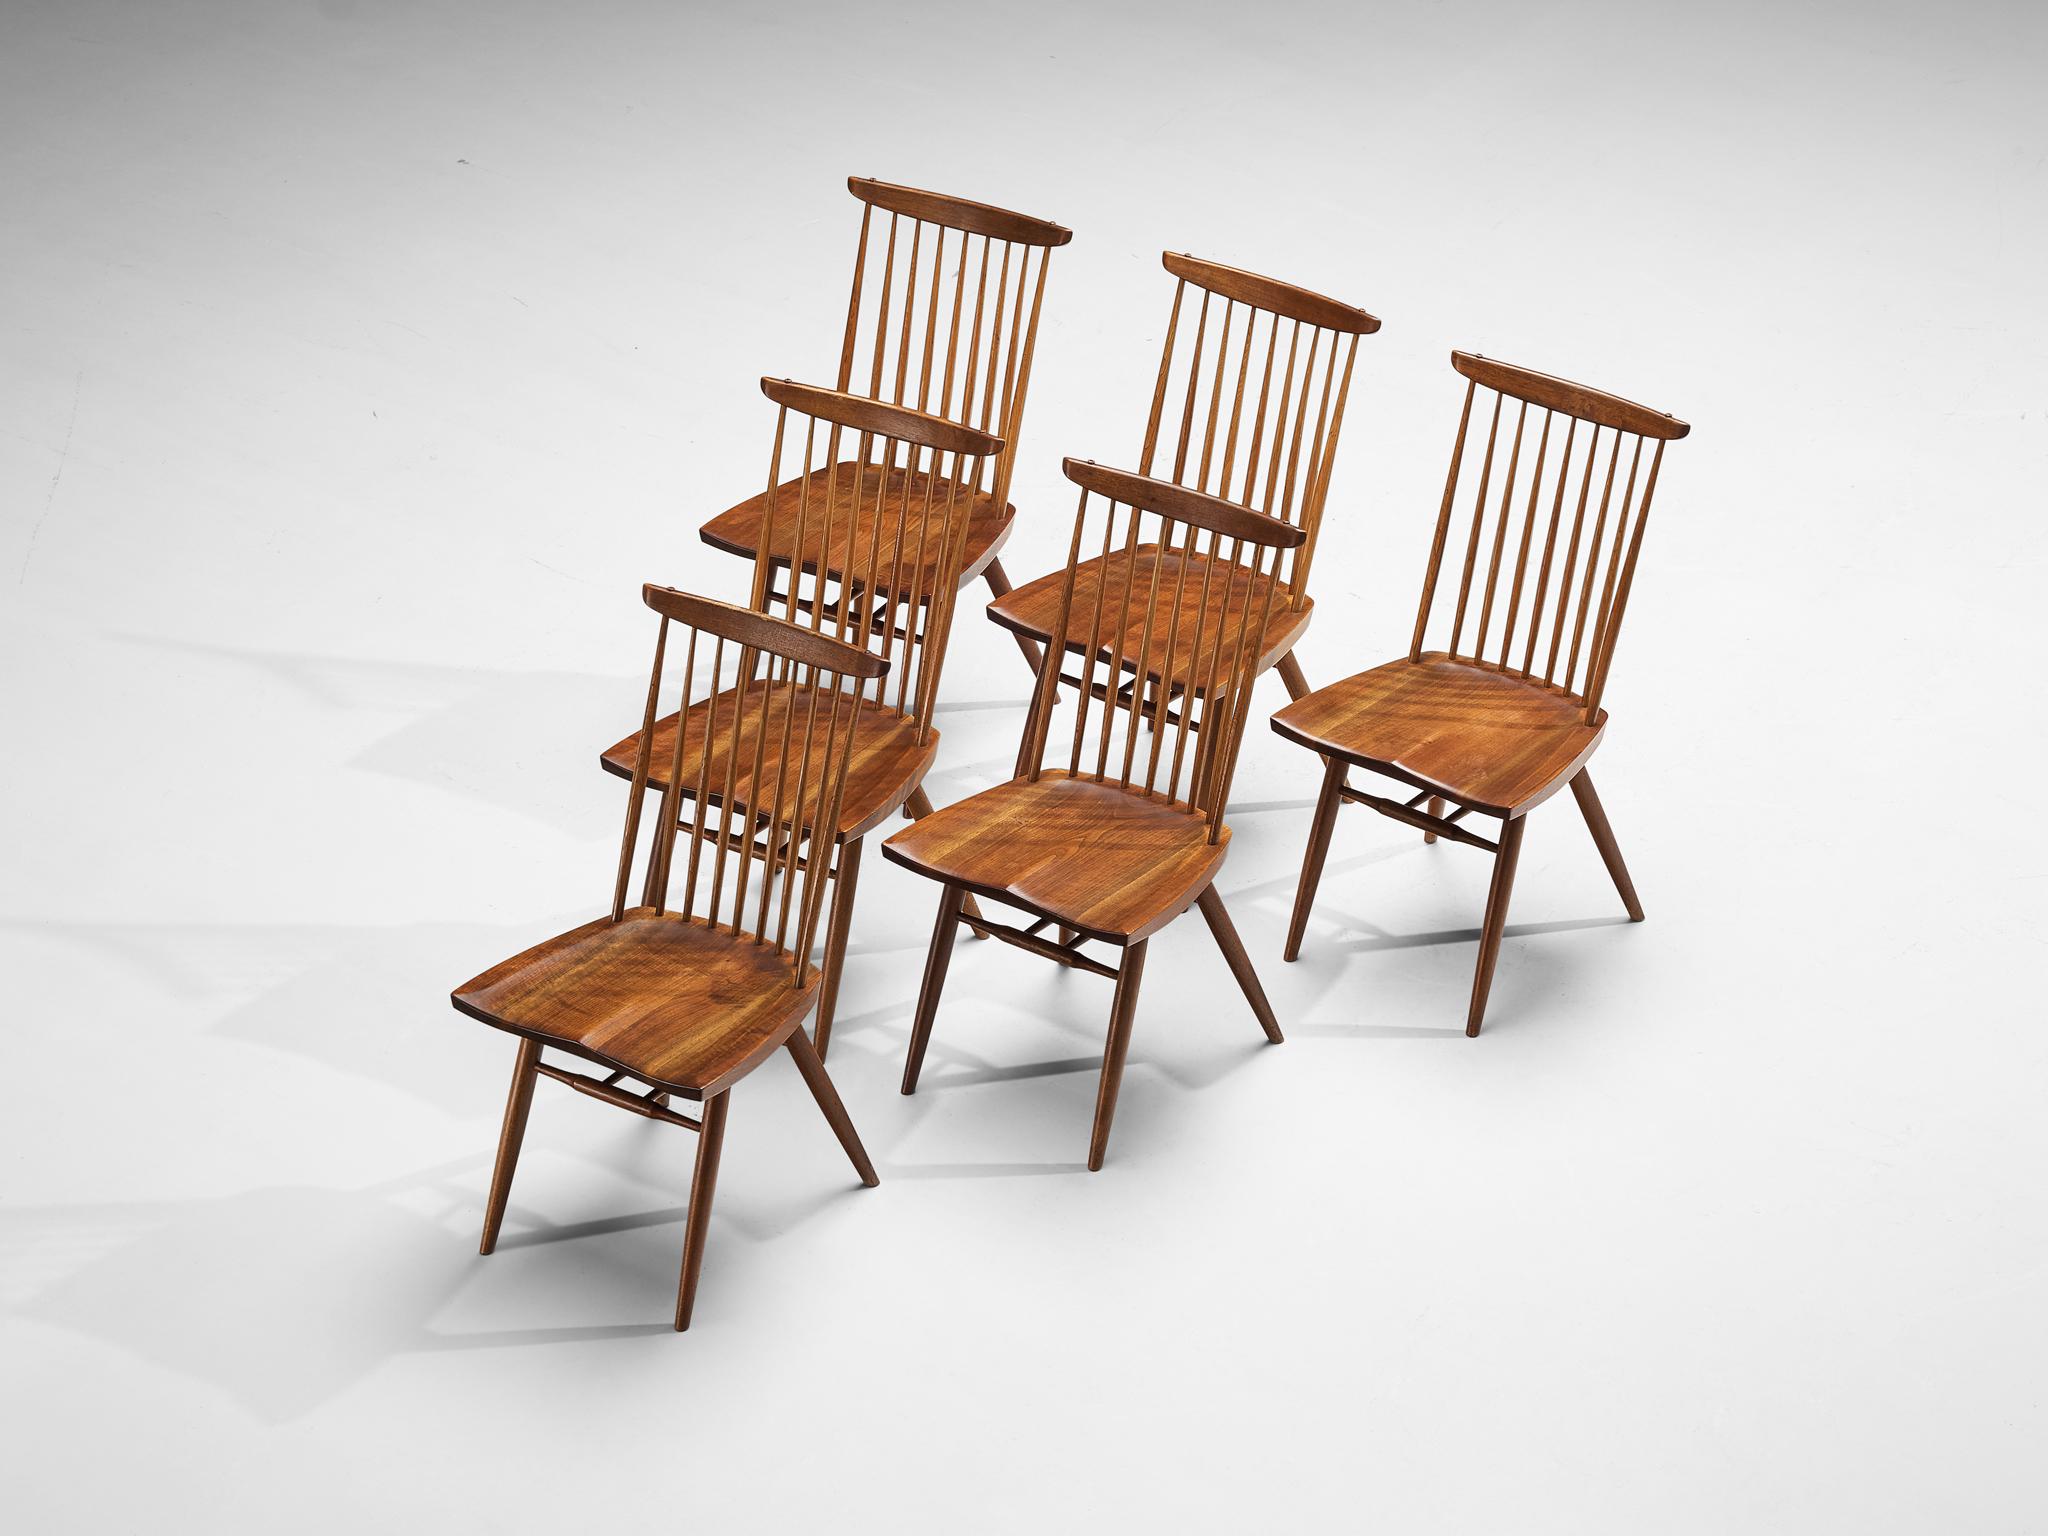 George Nakashima for Nakashima Studio, set of six 'New' dining chairs, American black walnut, hickory, United States, design 1956, production 1961

With regard to its essential form, material use, and woodwork, this ‘New’ dining chair is a testimony